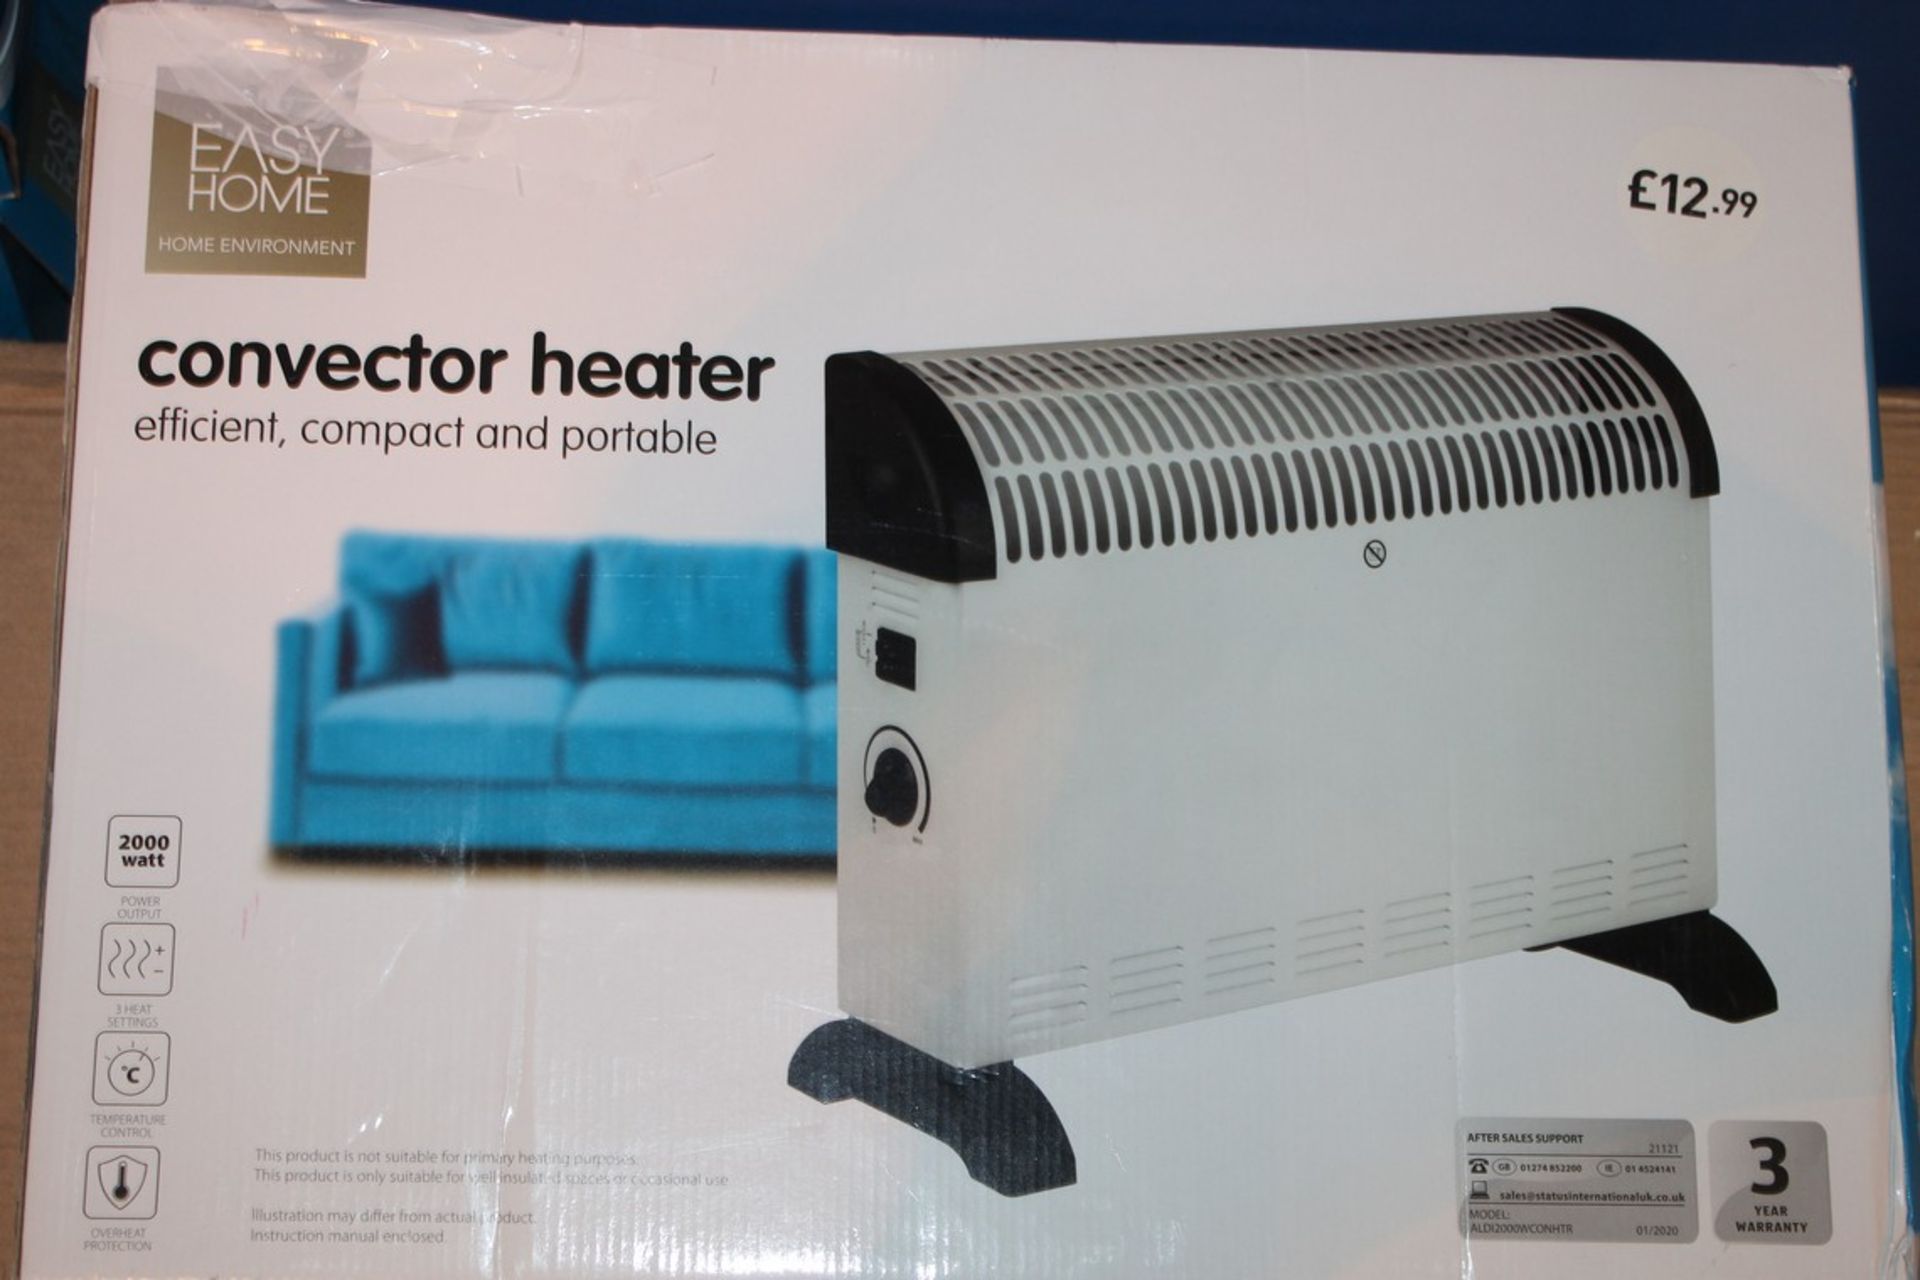 Lot to Contain 5 Boxed Easy Home Convector Heaters